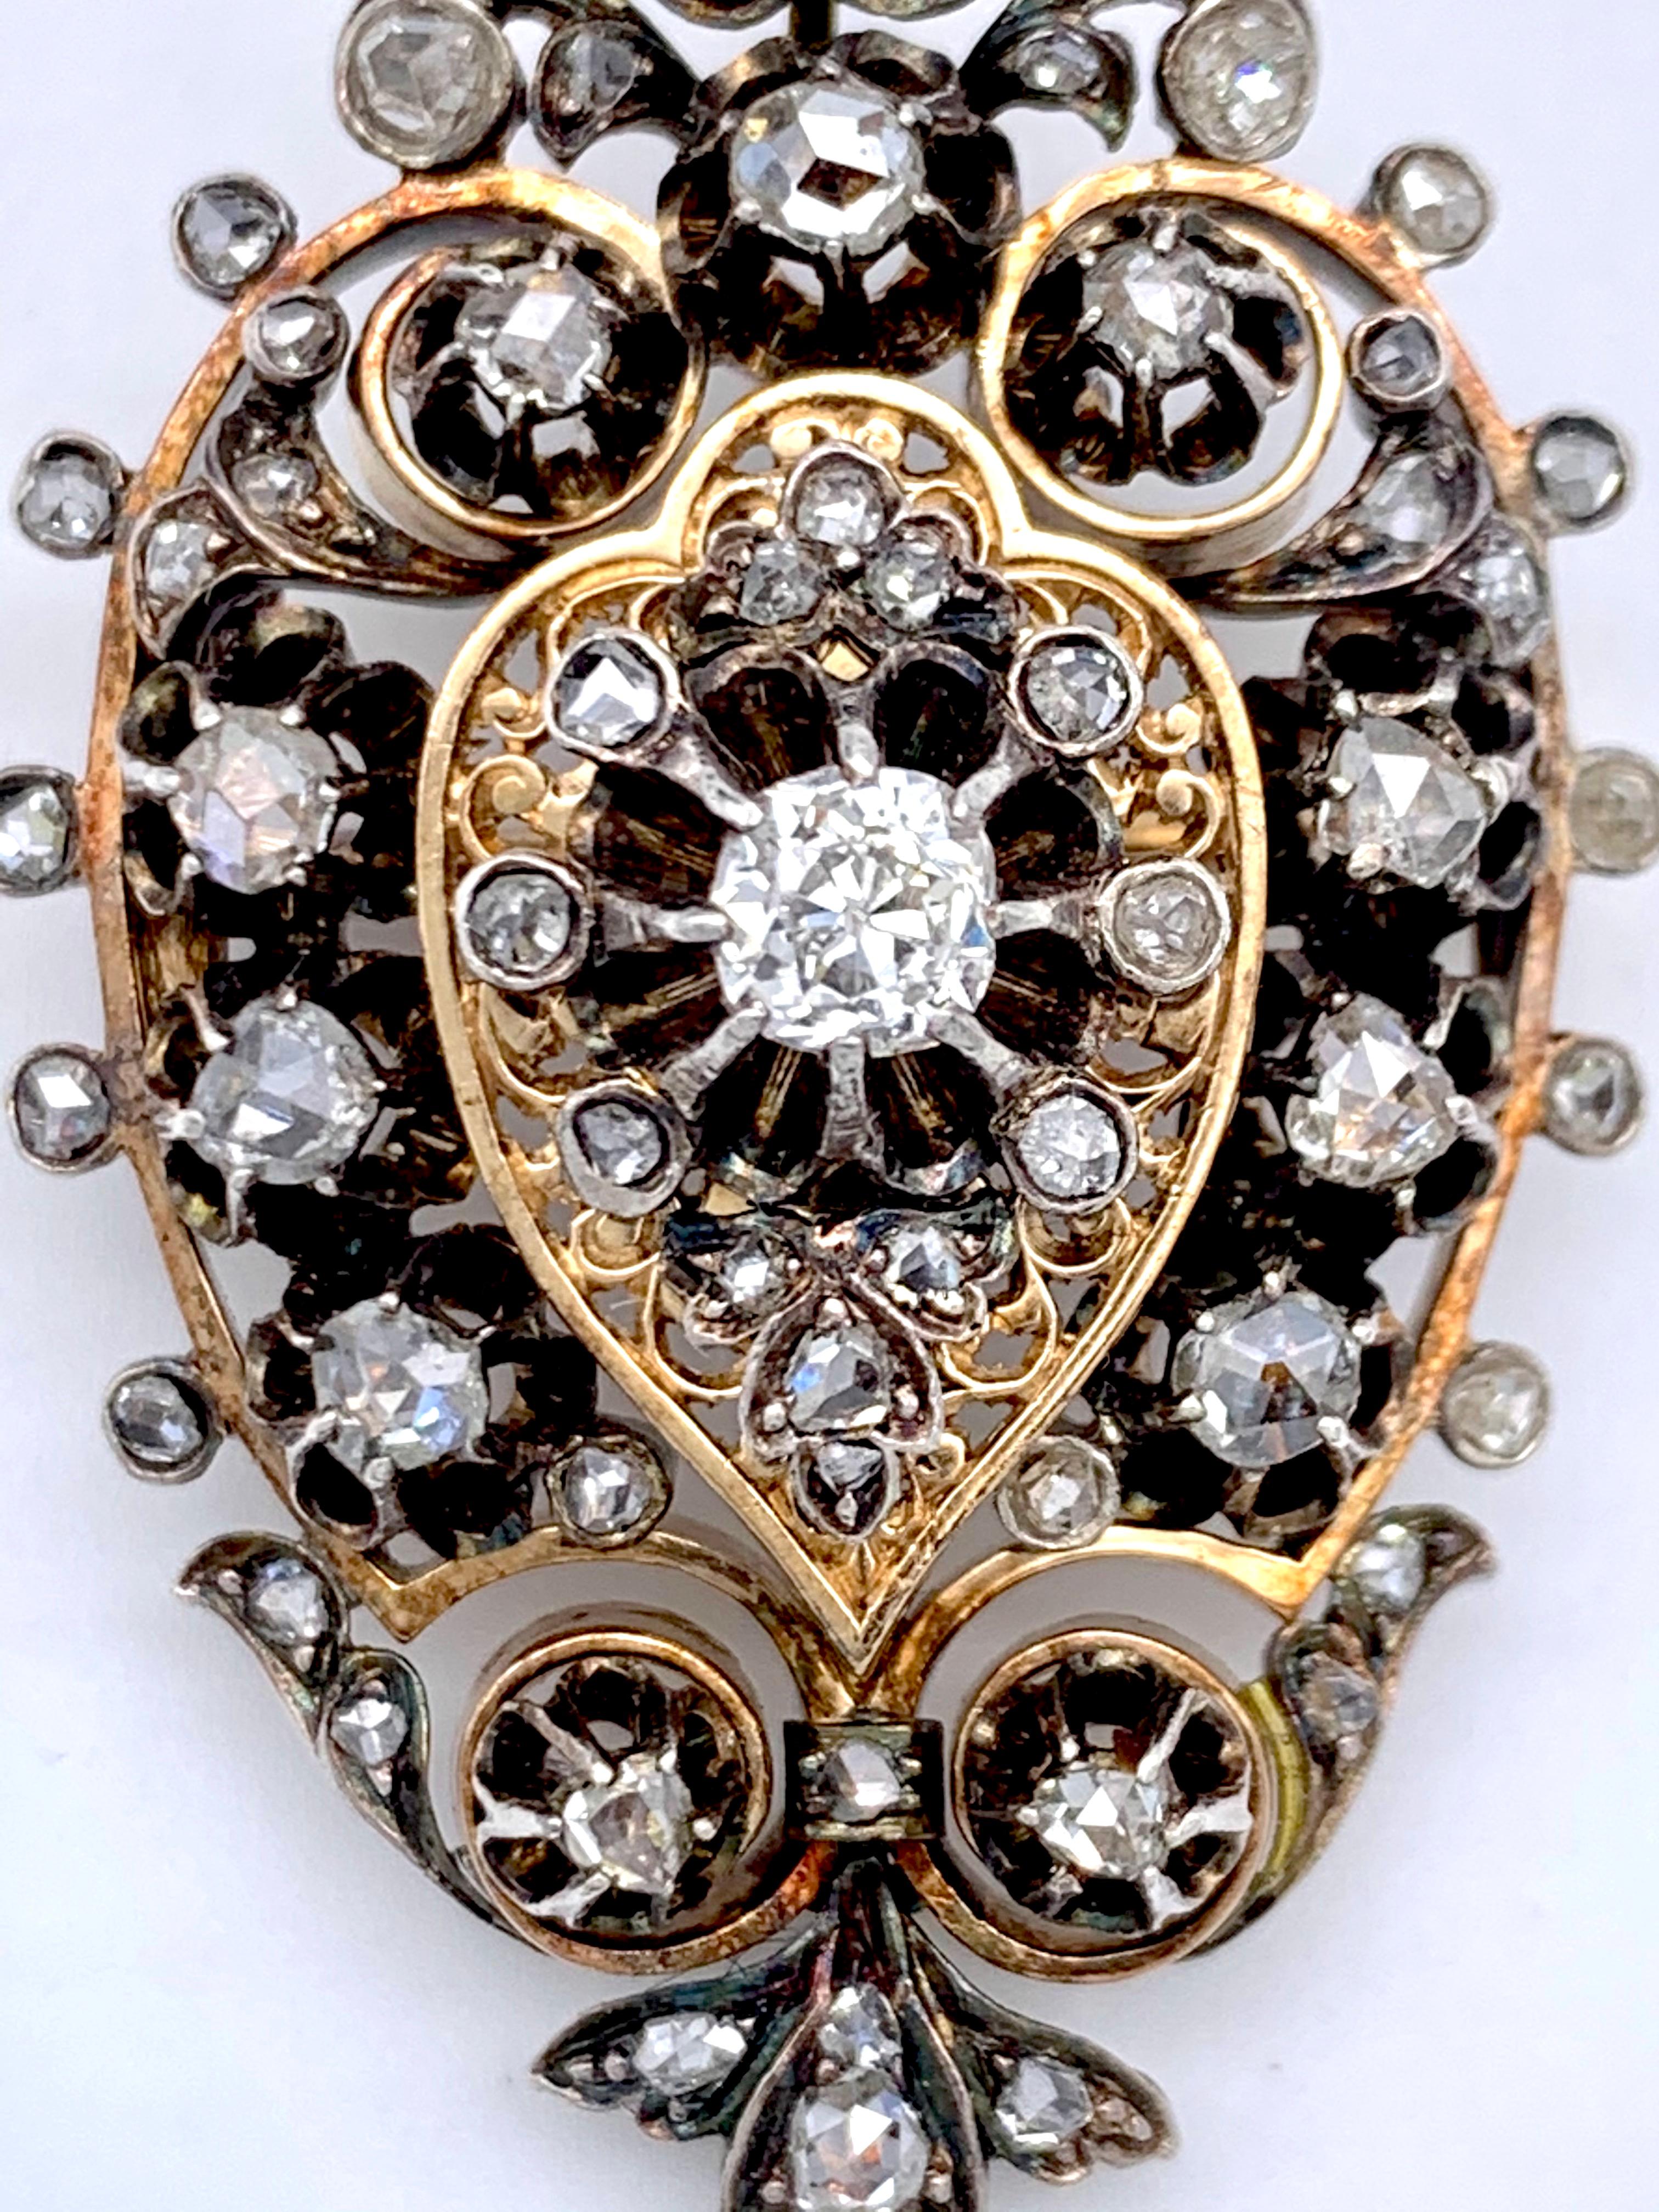 This versatile piece of jewellery can be worn as a pendant or brooch. The pendant loop is on a hinge that can be folded in and out. The rose diamonds are set in silver and backed onto a gold mount. The centre section is designed in the shape of a